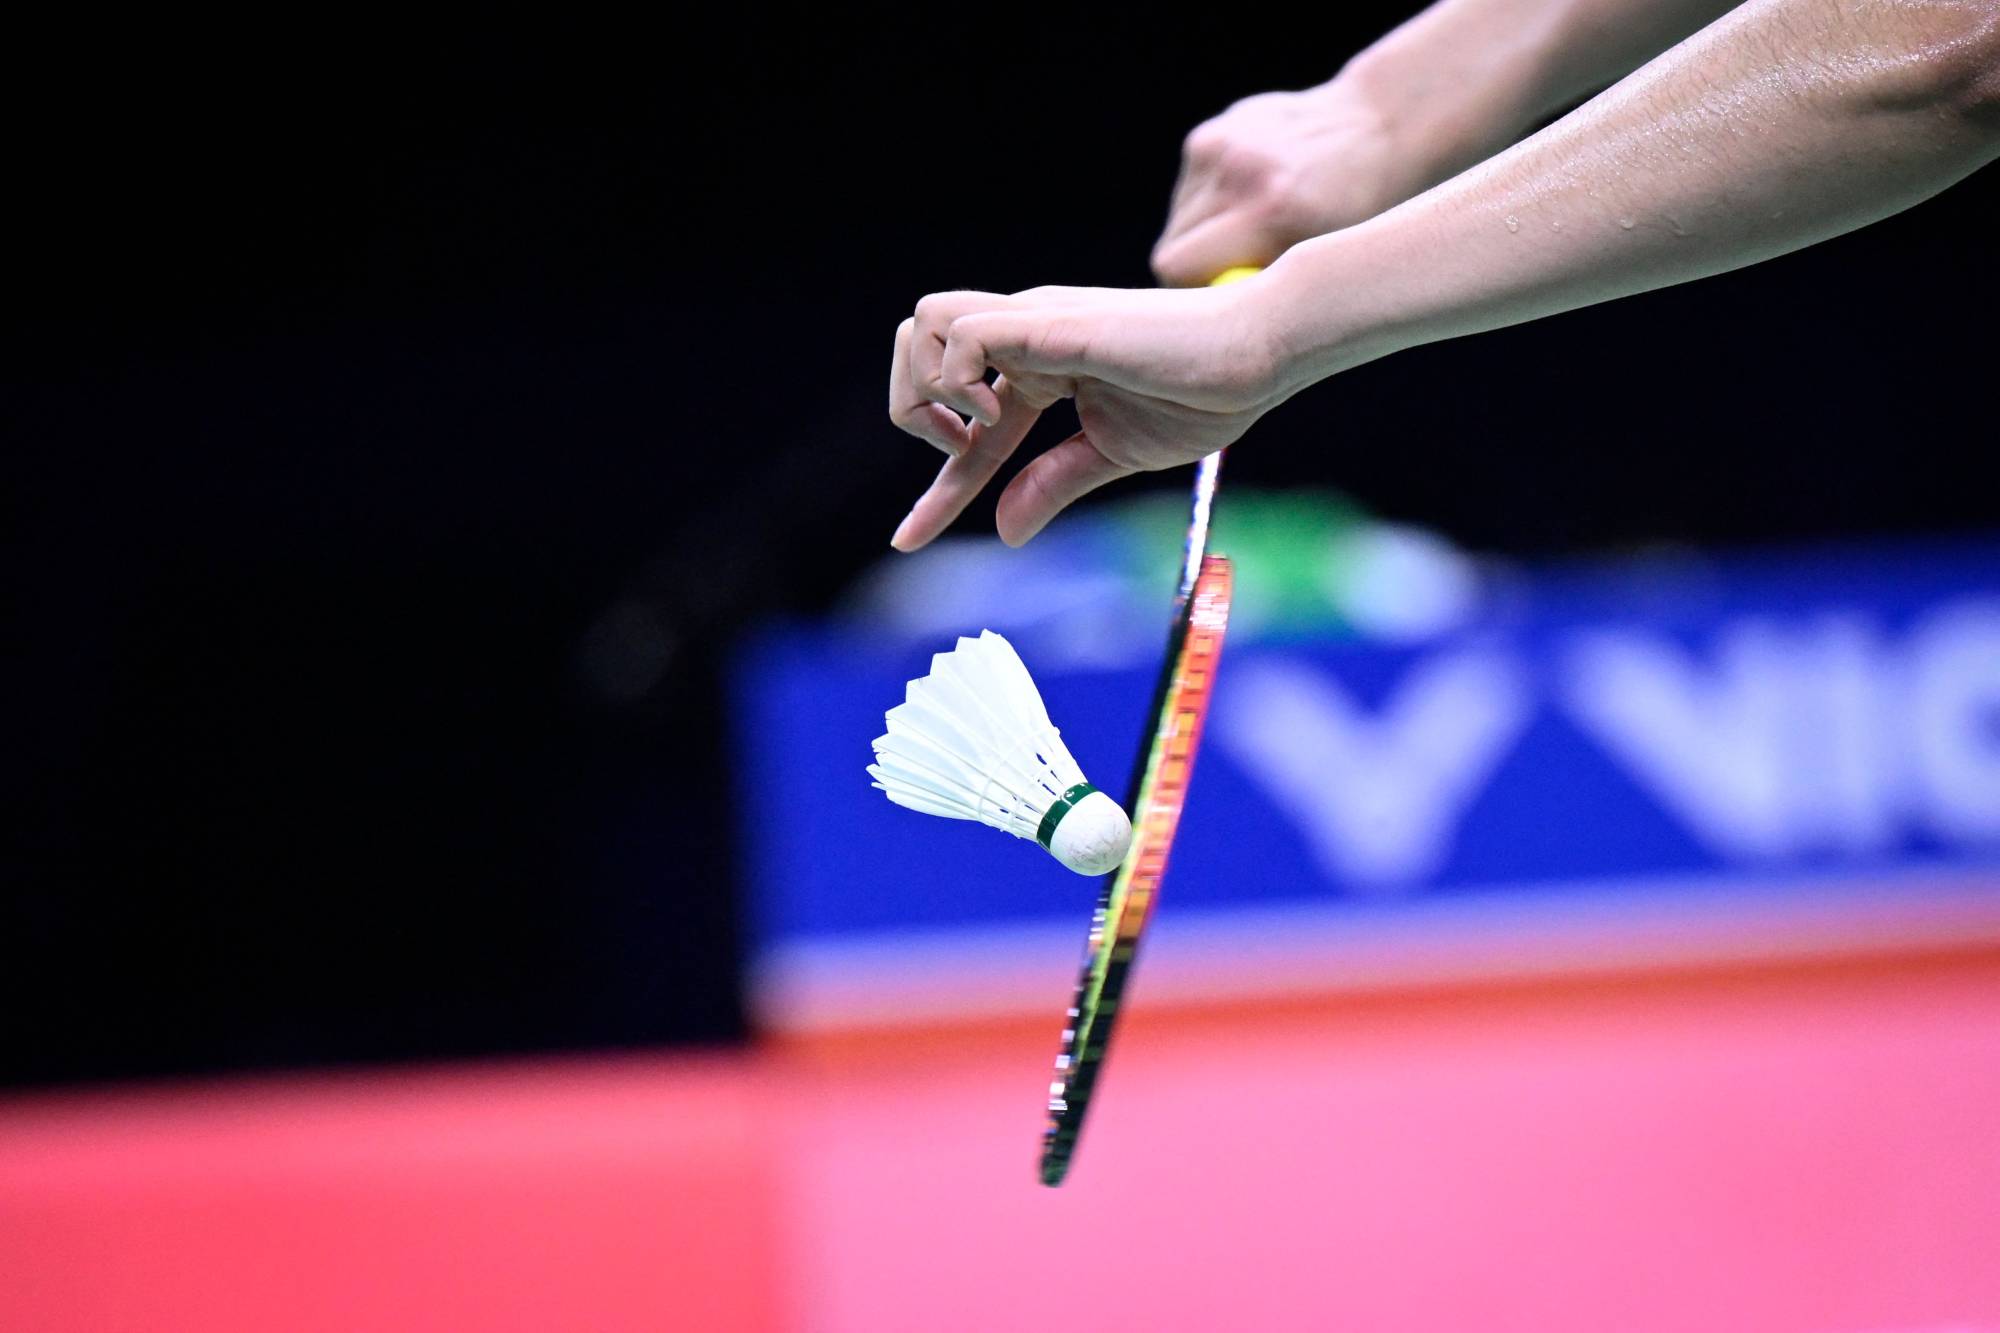 Badminton body extends ban on spin serve until after Paris Olympics